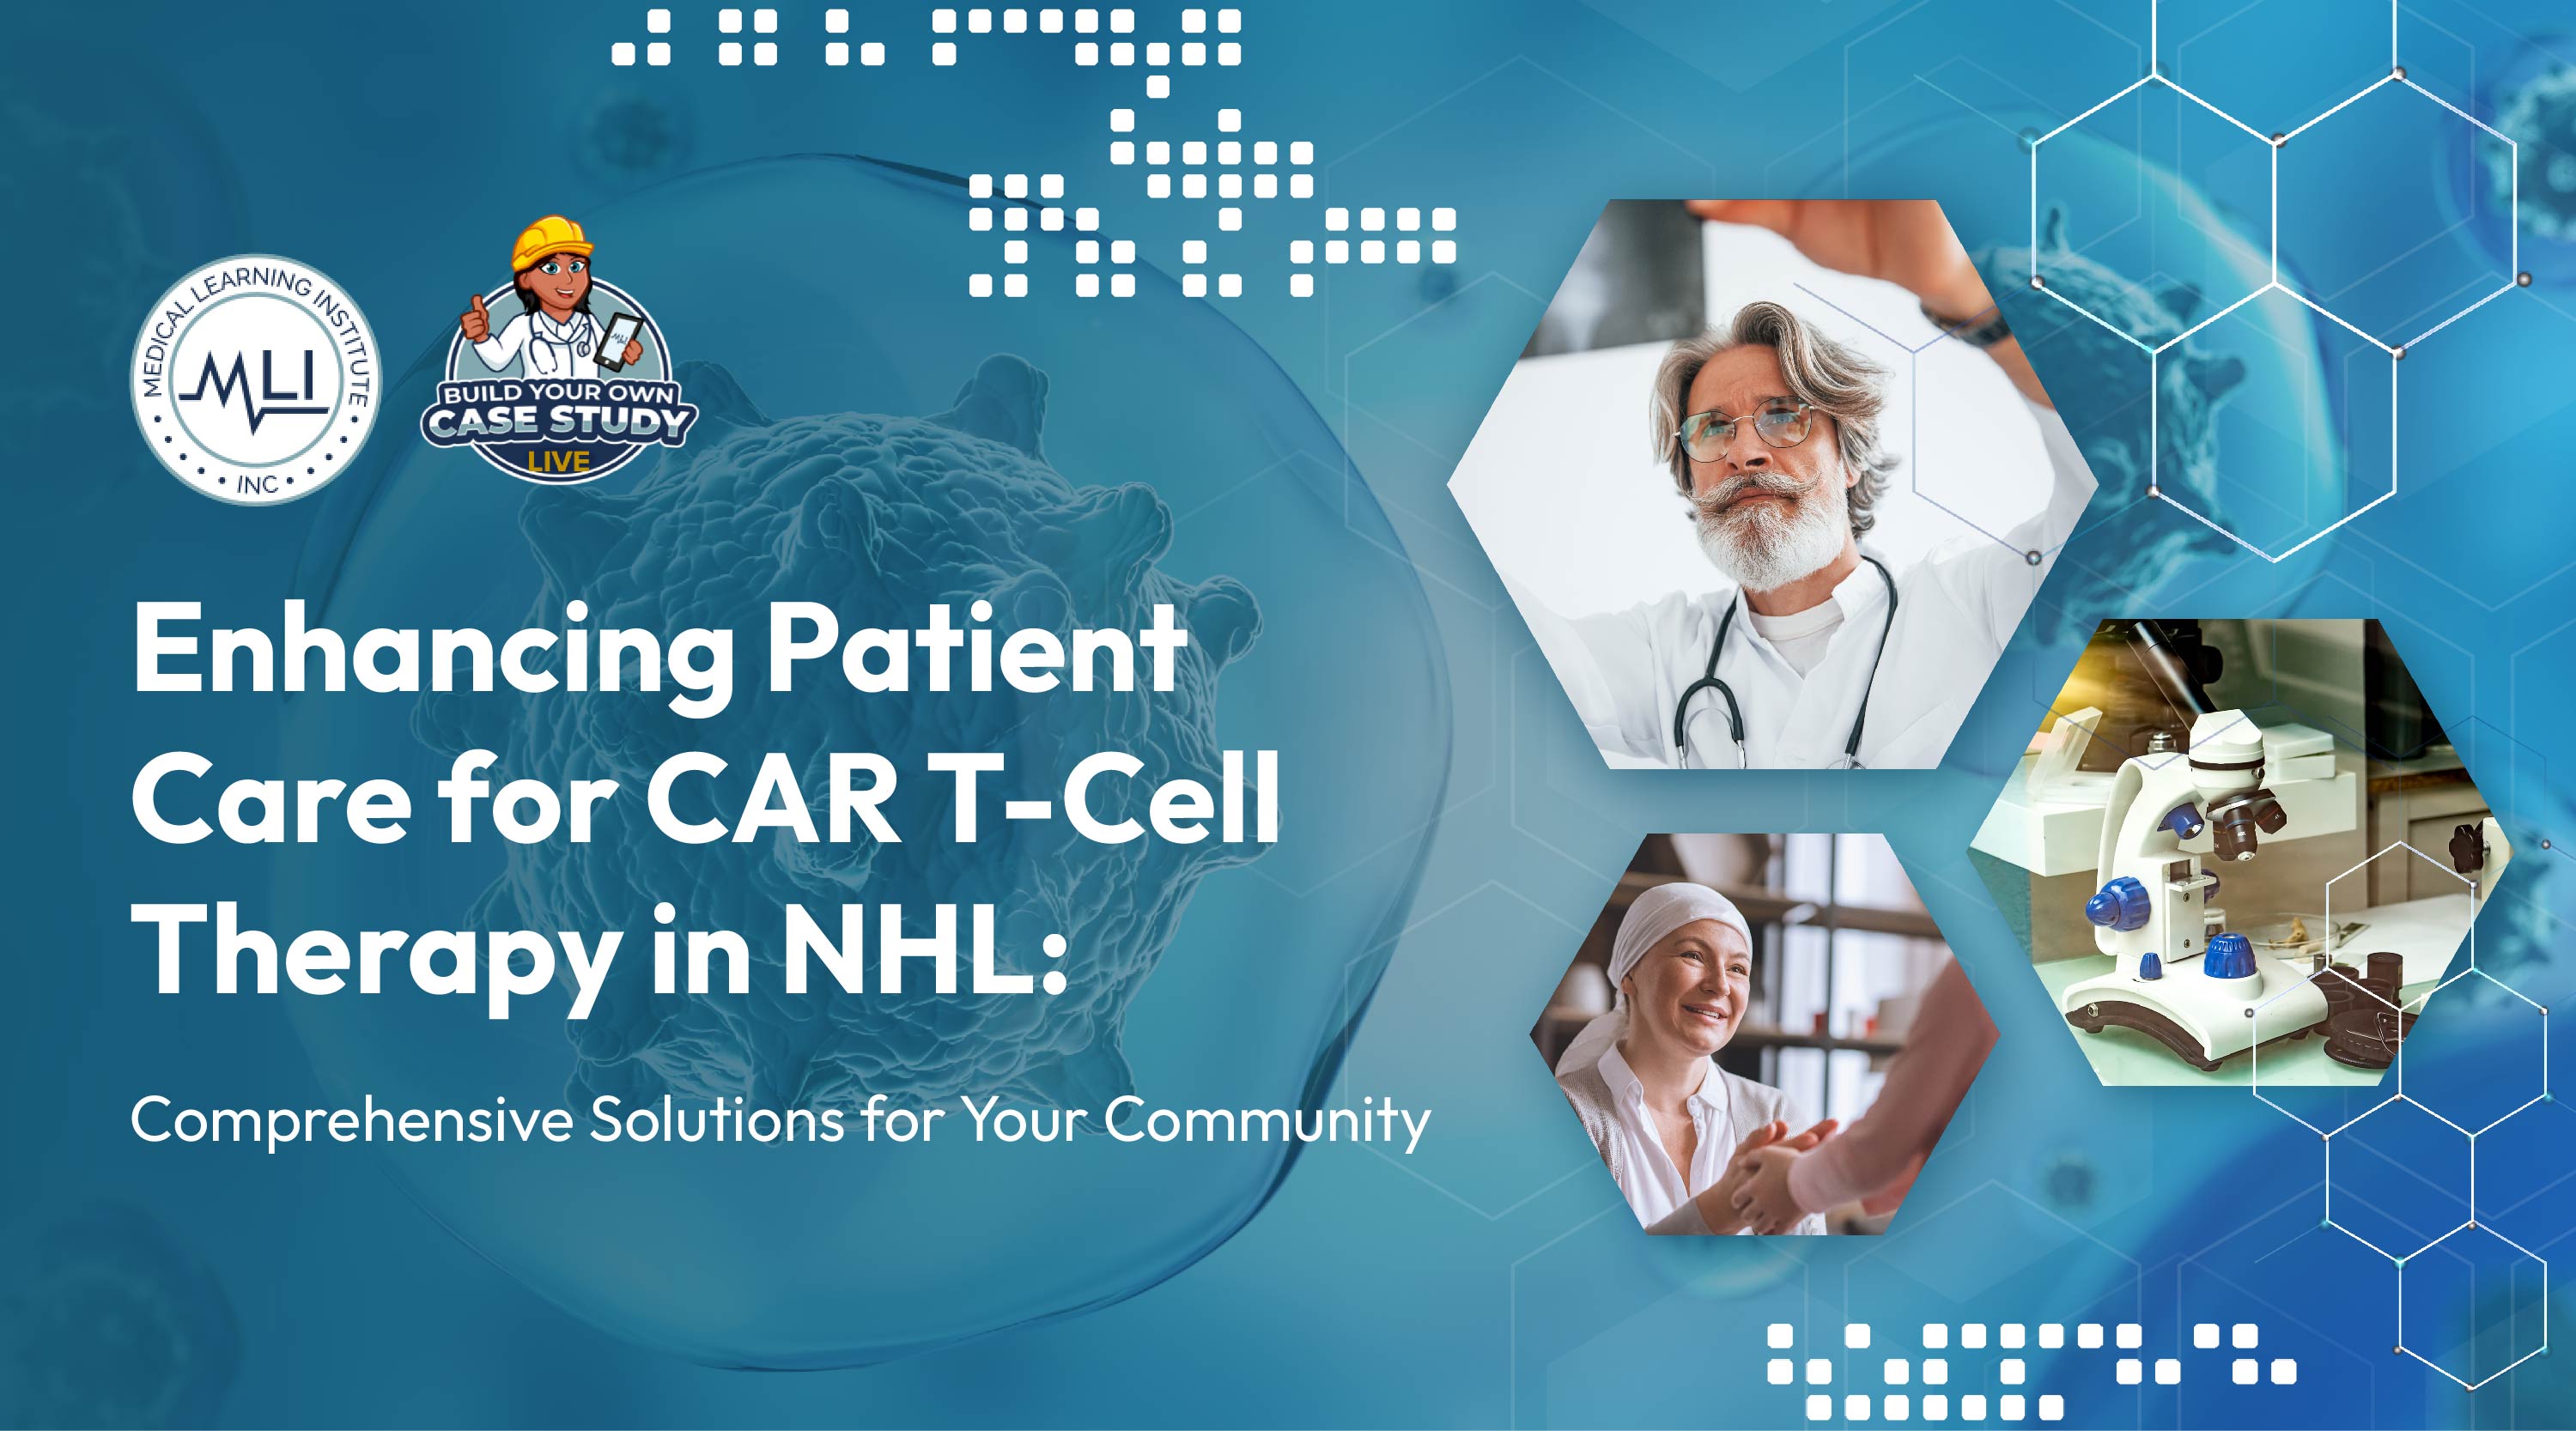 Build Your Own Case Study LIVE | Enhancing Patient Care for CAR T-cell Therapy in NHL: Comprehensive Solutions for Your Community